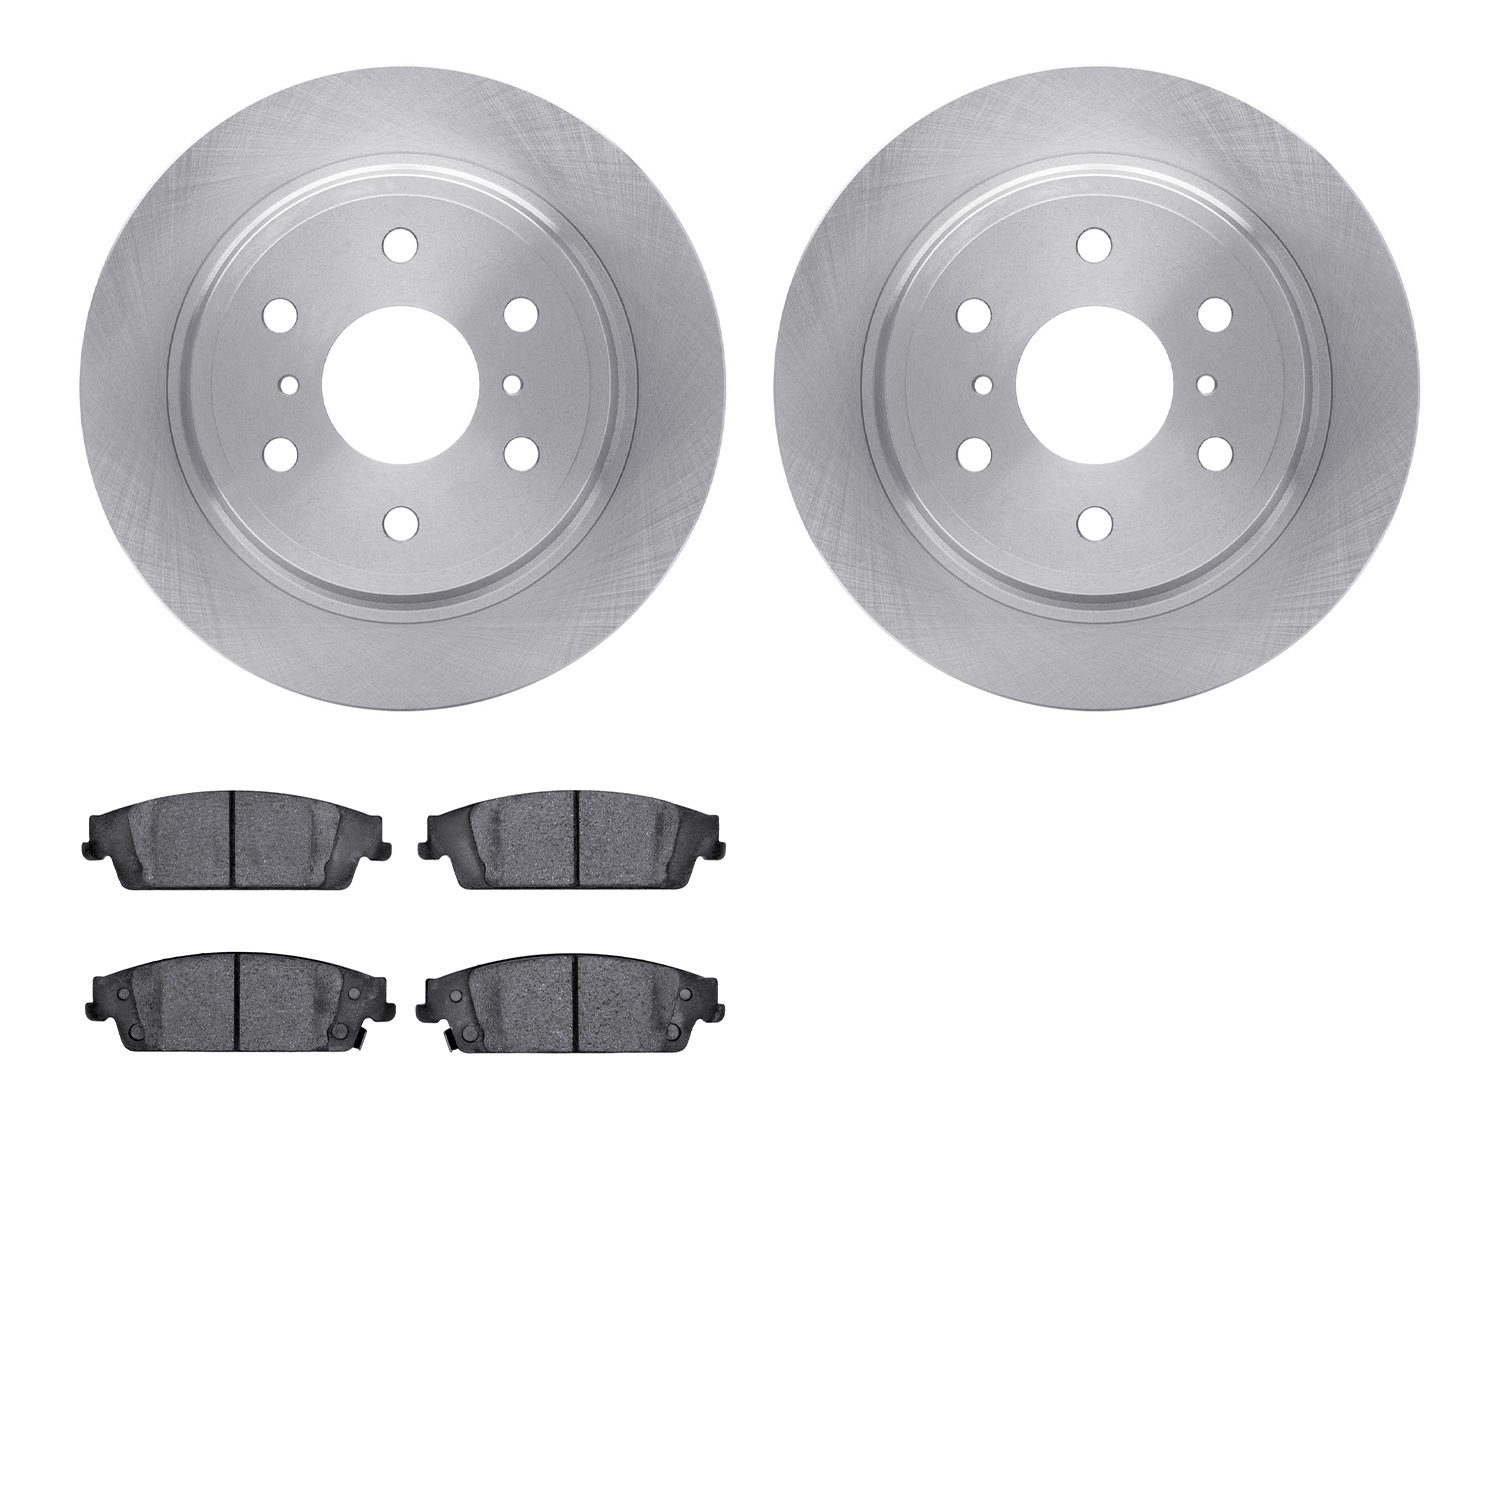 6402-48113 Brake Rotors with Ultimate-Duty Brake Pads, 2014-2020 GM, Position: Rear